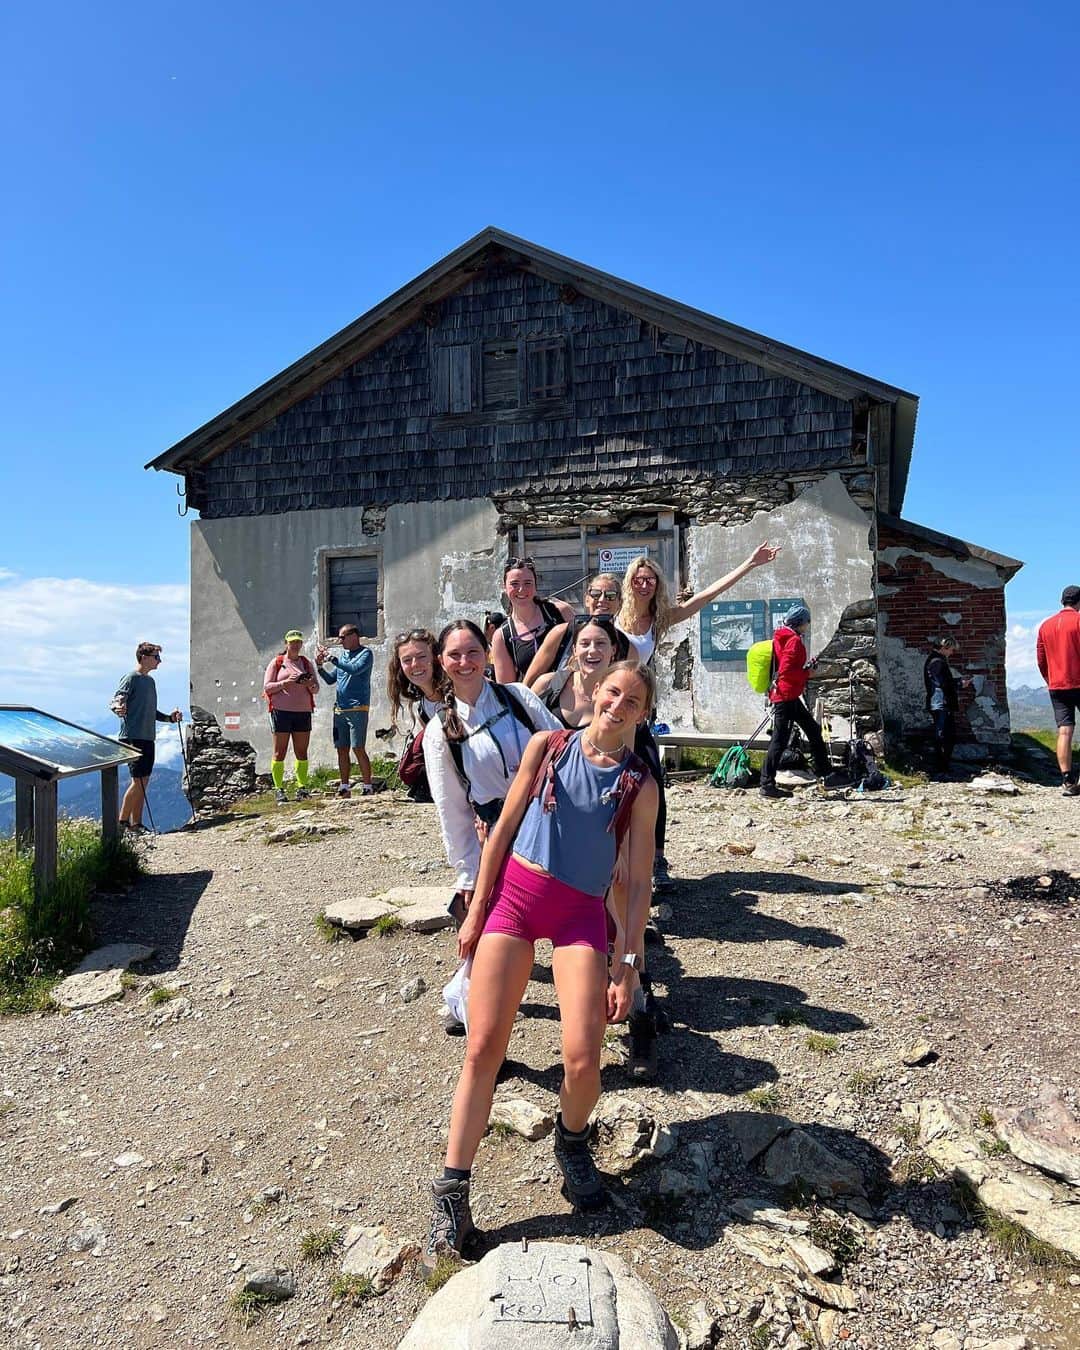 Zanna Van Dijkさんのインスタグラム写真 - (Zanna Van DijkInstagram)「Dolomites group hiking trip dump + TIPS! 🏔️   The most incredible week with the most incredible group of women! It’s been an absolute pleasure to make epic memories together and share our mutual love of the mountains. I’m gonna miss these gals 🥹  1️⃣ Candini di Misurina viewpoint - my favourite view in the Dolomites! 😍 2️⃣ @staywildswim ladies swimming in Lago Federa, the warmest lake we dipped in with plenty of rocks to jump in from 🏊‍♀️  3️⃣ The Lago Federa loop hike. Make sure you walk it counter clockwise for the best scenery 👌🏼  4️⃣ Hiking through the valleys of Parco Naturale Delle Dolomiti d’Ampezzo, a gem of a trail without the crowds 🌲  5️⃣ Lago di Braies. The most stunning turquoise blue lake, make sure you get there early as it’s super popular ✨  6️⃣ One foot in Austria, one foot in Italy at the summit of Mount Elmo. This place has the most epic 360 views 🇦🇹🇮🇹  7️⃣ There’s always time for a post-hike Aperol - they’re so cheap here it would be a crime not to! 🥂  8️⃣ A picnic with a view of Tre Cime, the most iconic mountains in the region 🧺  9️⃣ Dodging thunderstorms as we explore Cinque Torri. Make sure you hike up to Rifugio Nuvolau for a hot chocolate ⛈️  🔟 Swimming in Dürrensee. My personal favourite view that we swam with 🤩  If you want to join me on my next group hiking trip, there’s spaces on my October adventure to mountains in Turkey! All the info is on my website 🫶🏼   Dolomites travel guides incoming! ♥️ #thedolomites #grouphiking #hikinggroup」7月22日 18時03分 - zannavandijk